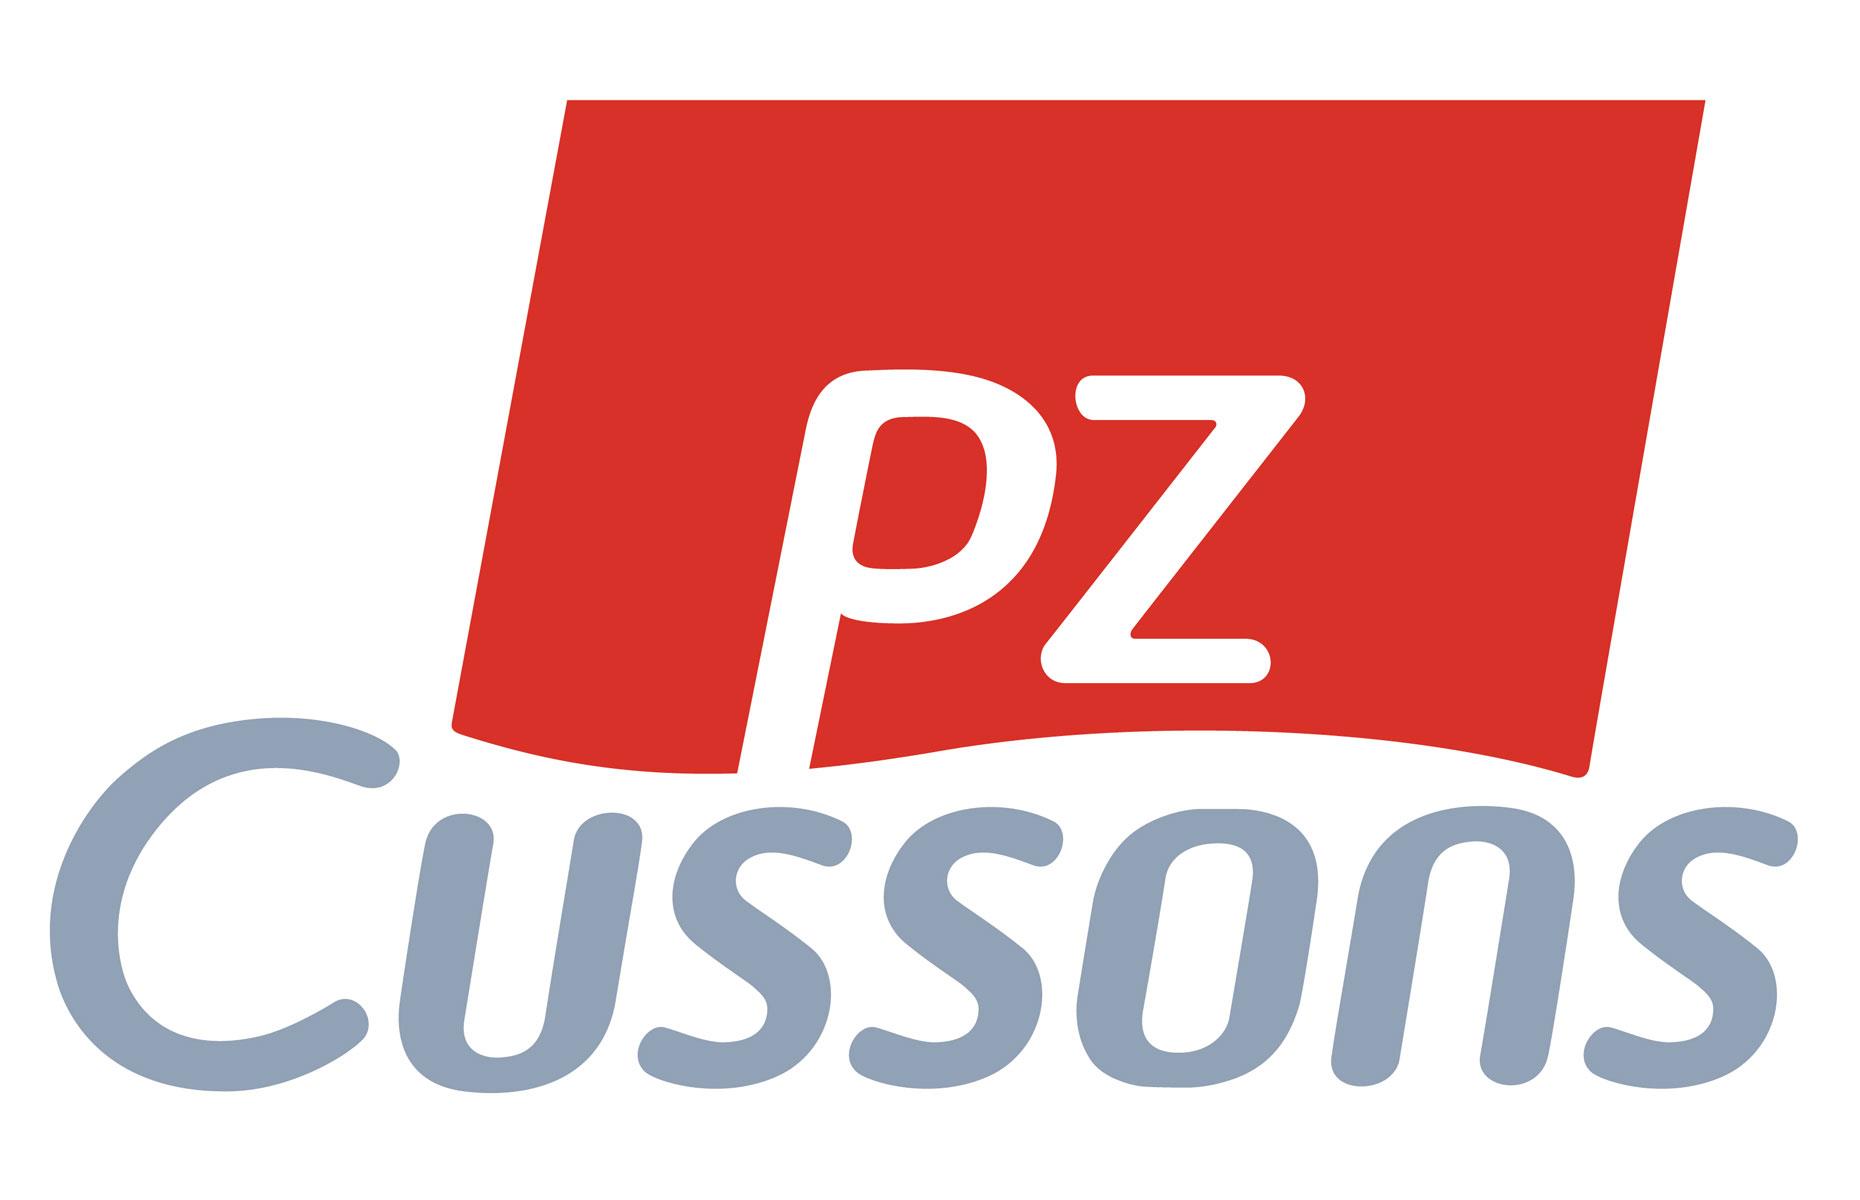 1953 – PZ Cussons: $1,000 invested then is worth $737,000 (£504k) today